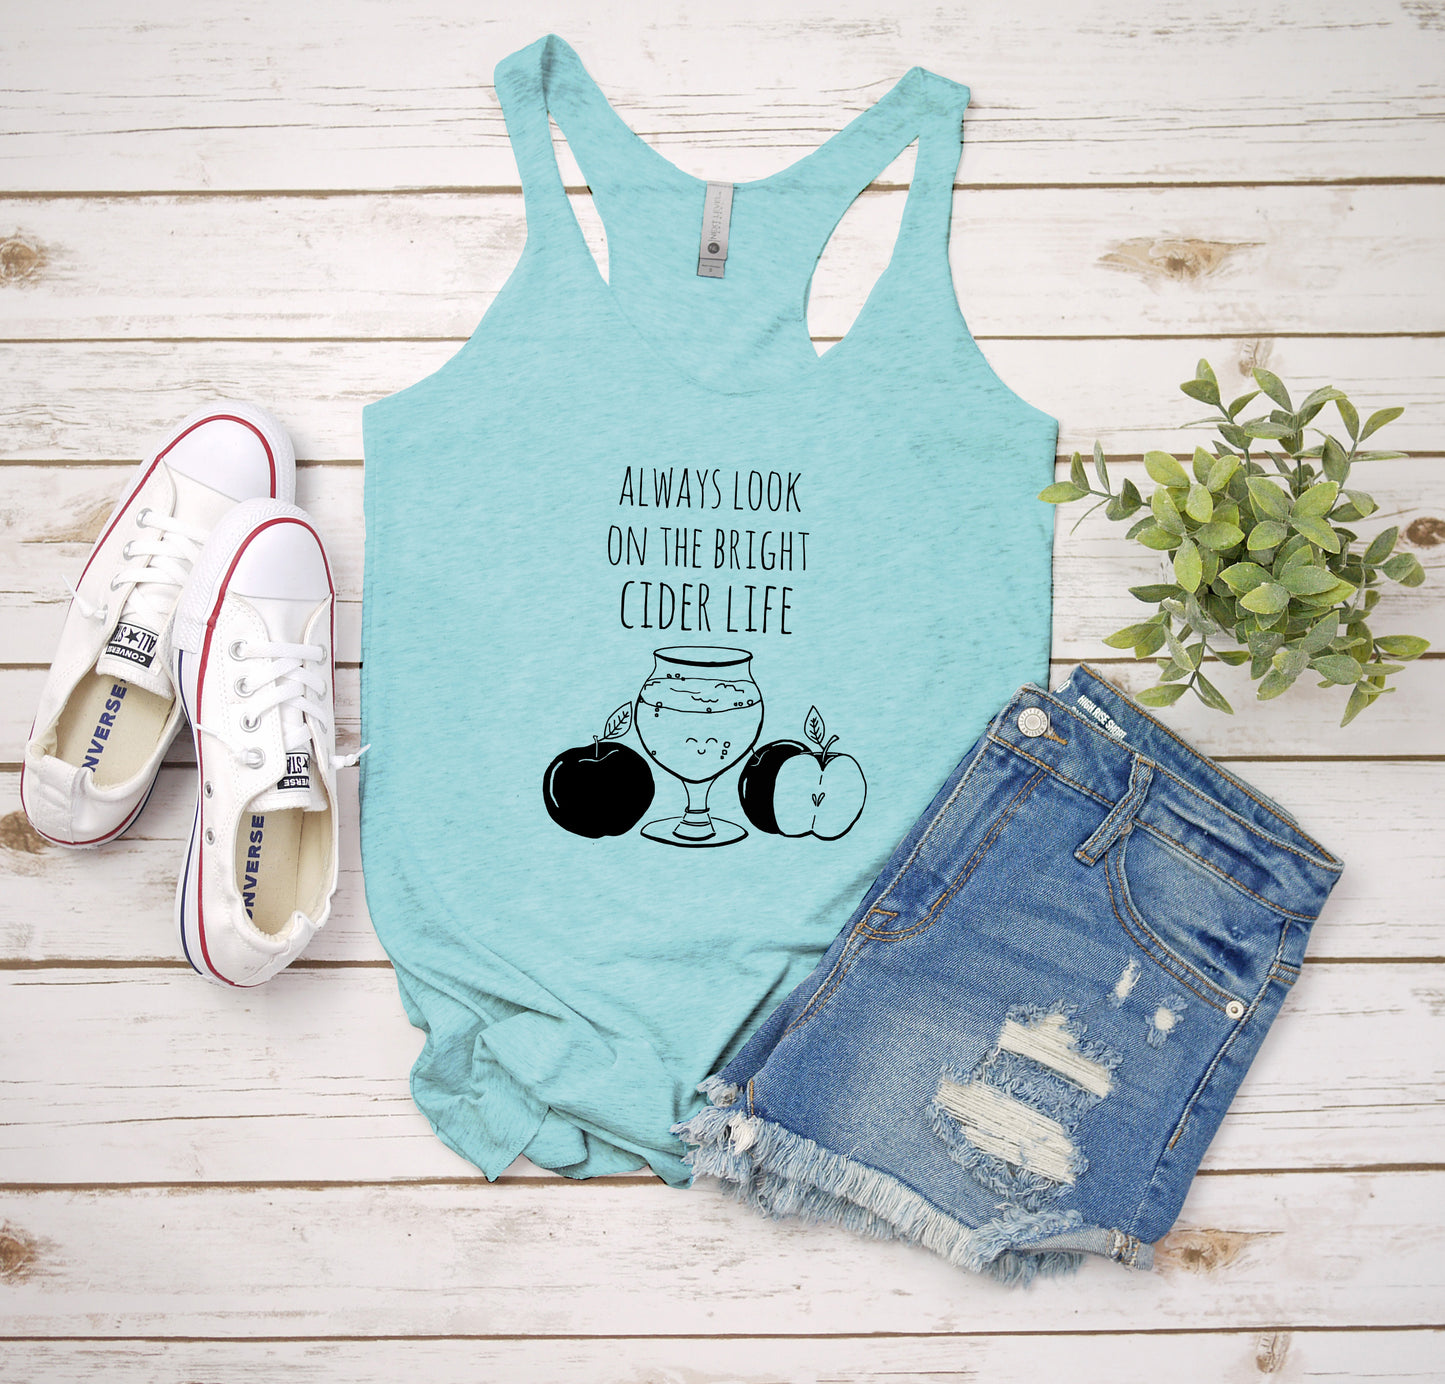 Look On The Bright Cider Life - Women's Tank - Heather Gray, Tahiti, or Envy